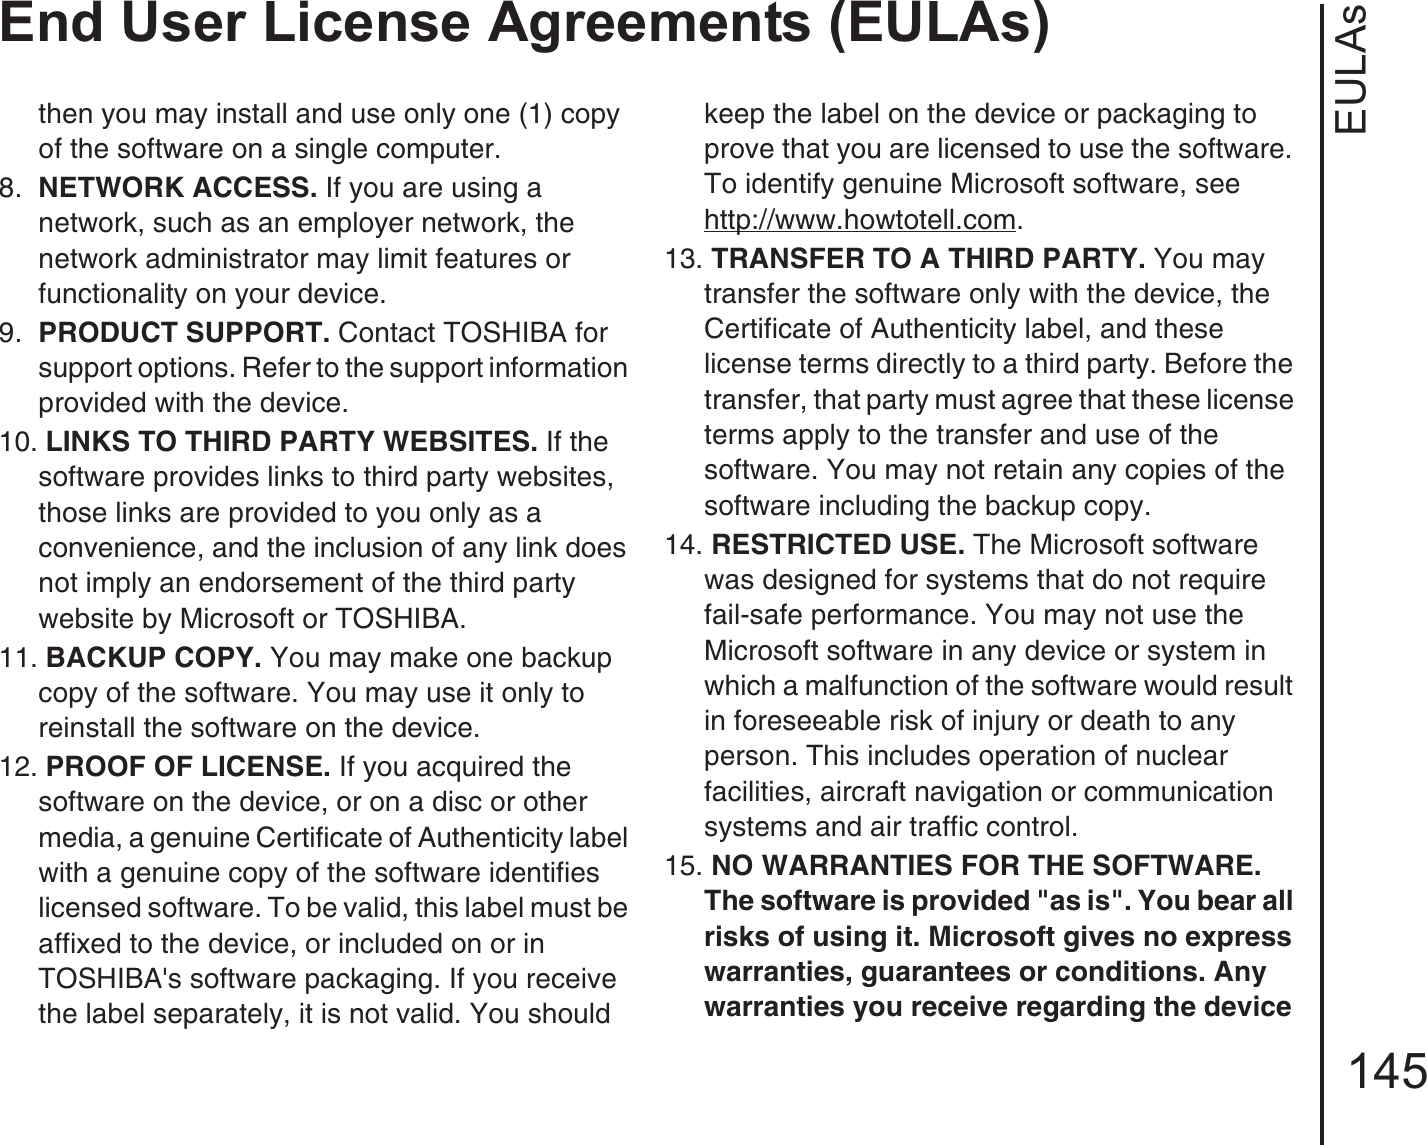 EULAsEnd User License Agreements (EULAs)145then you may install and use only one (1) copy of the software on a single computer. 8.  NETWORK ACCESS. If you are using a network, such as an employer network, the network administrator may limit features or functionality on your device.9.  PRODUCT SUPPORT. Contact TOSHIBA for support options. Refer to the support information provided with the device.10. LINKS TO THIRD PARTY WEBSITES. If the software provides links to third party websites, those links are provided to you only as a convenience, and the inclusion of any link does not imply an endorsement of the third party website by Microsoft or TOSHIBA.11. BACKUP COPY. You may make one backup copy of the software. You may use it only to reinstall the software on the device.12. PROOF OF LICENSE. If you acquired the software on the device, or on a disc or other media, a genuine Certificate of Authenticity label with a genuine copy of the software identifies licensed software. To be valid, this label must be affixed to the device, or included on or in TOSHIBA&apos;s software packaging. If you receive the label separately, it is not valid. You should keep the label on the device or packaging to prove that you are licensed to use the software. To identify genuine Microsoft software, seehttp://www.howtotell.com.13. TRANSFER TO A THIRD PARTY. You may transfer the software only with the device, the Certificate of Authenticity label, and these license terms directly to a third party. Before the transfer, that party must agree that these license terms apply to the transfer and use of the software. You may not retain any copies of the software including the backup copy.14. RESTRICTED USE. The Microsoft software was designed for systems that do not require fail-safe performance. You may not use the Microsoft software in any device or system in which a malfunction of the software would result in foreseeable risk of injury or death to any person. This includes operation of nuclear facilities, aircraft navigation or communication systems and air traffic control.15. NO WARRANTIES FOR THE SOFTWARE. The software is provided &quot;as is&quot;. You bear all risks of using it. Microsoft gives no express warranties, guarantees or conditions. Any warranties you receive regarding the device 